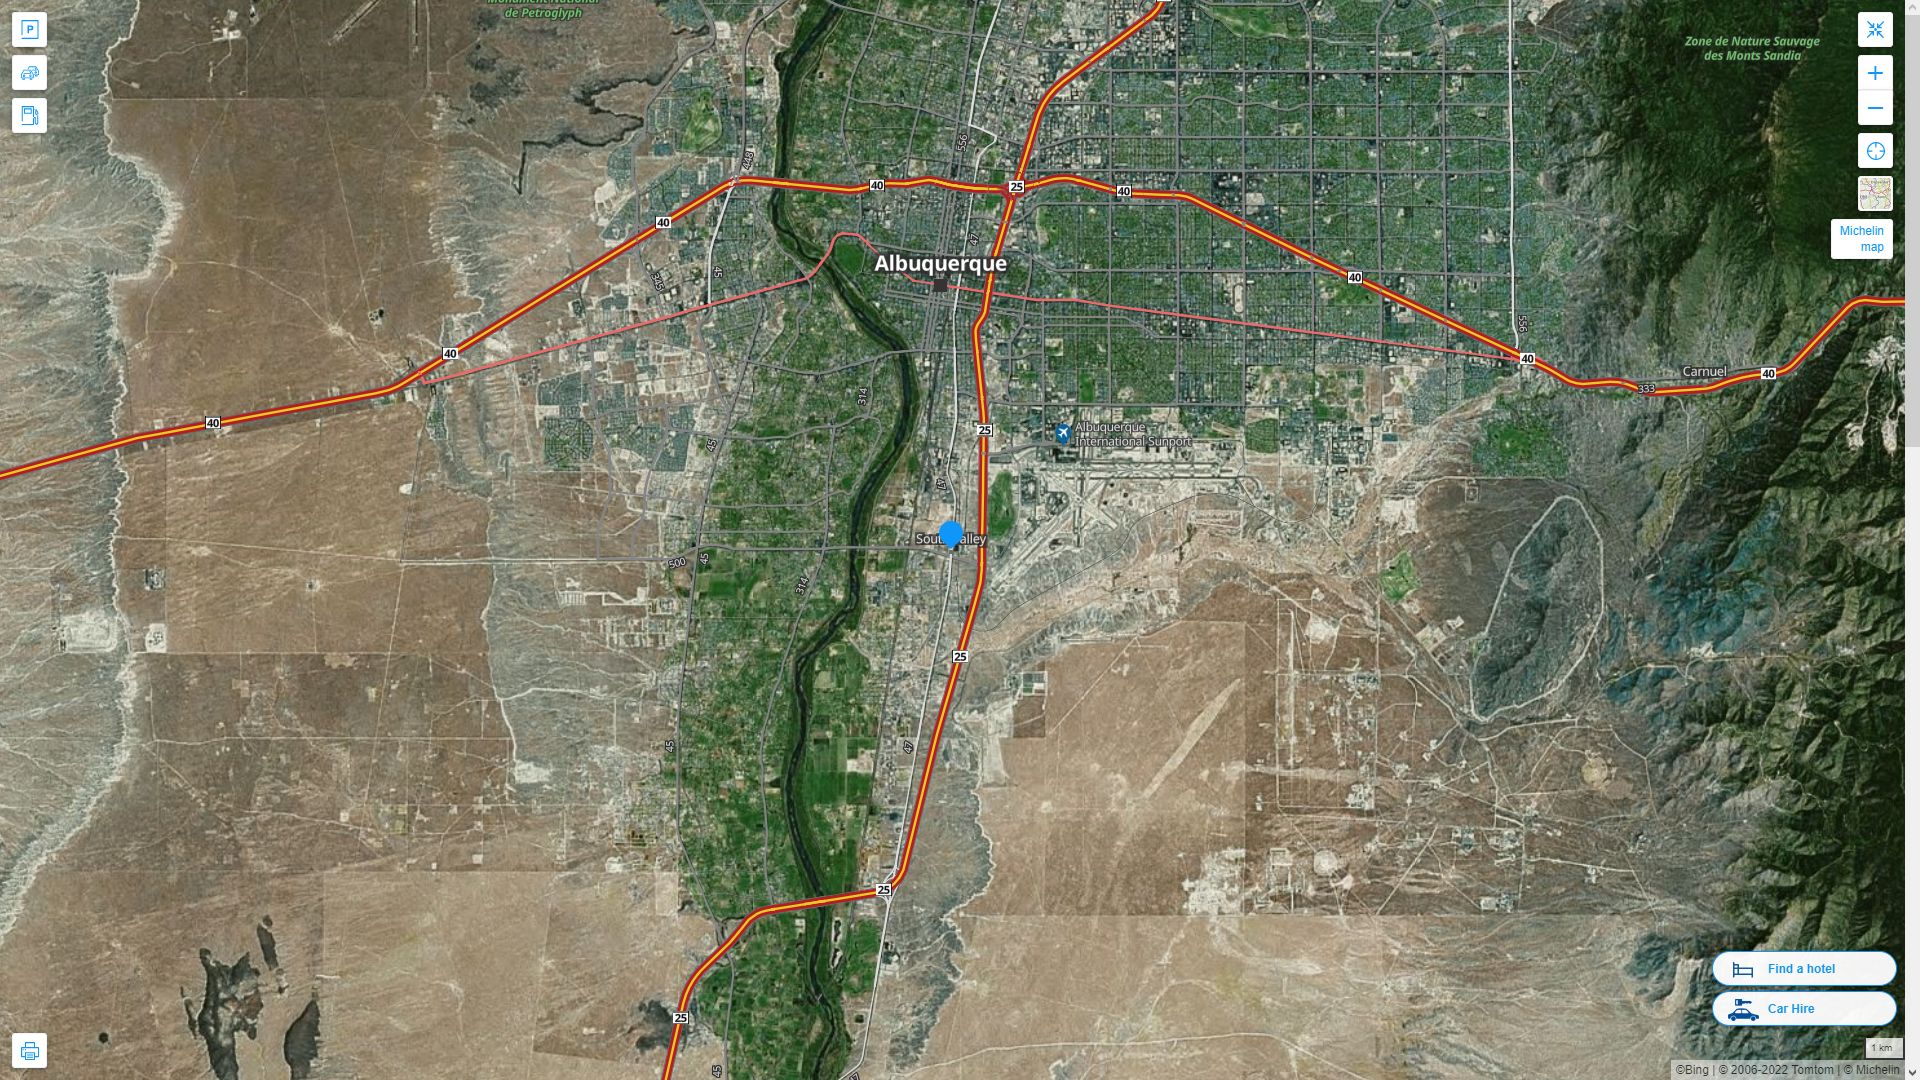 South Valley New Mexico Highway and Road Map with Satellite View